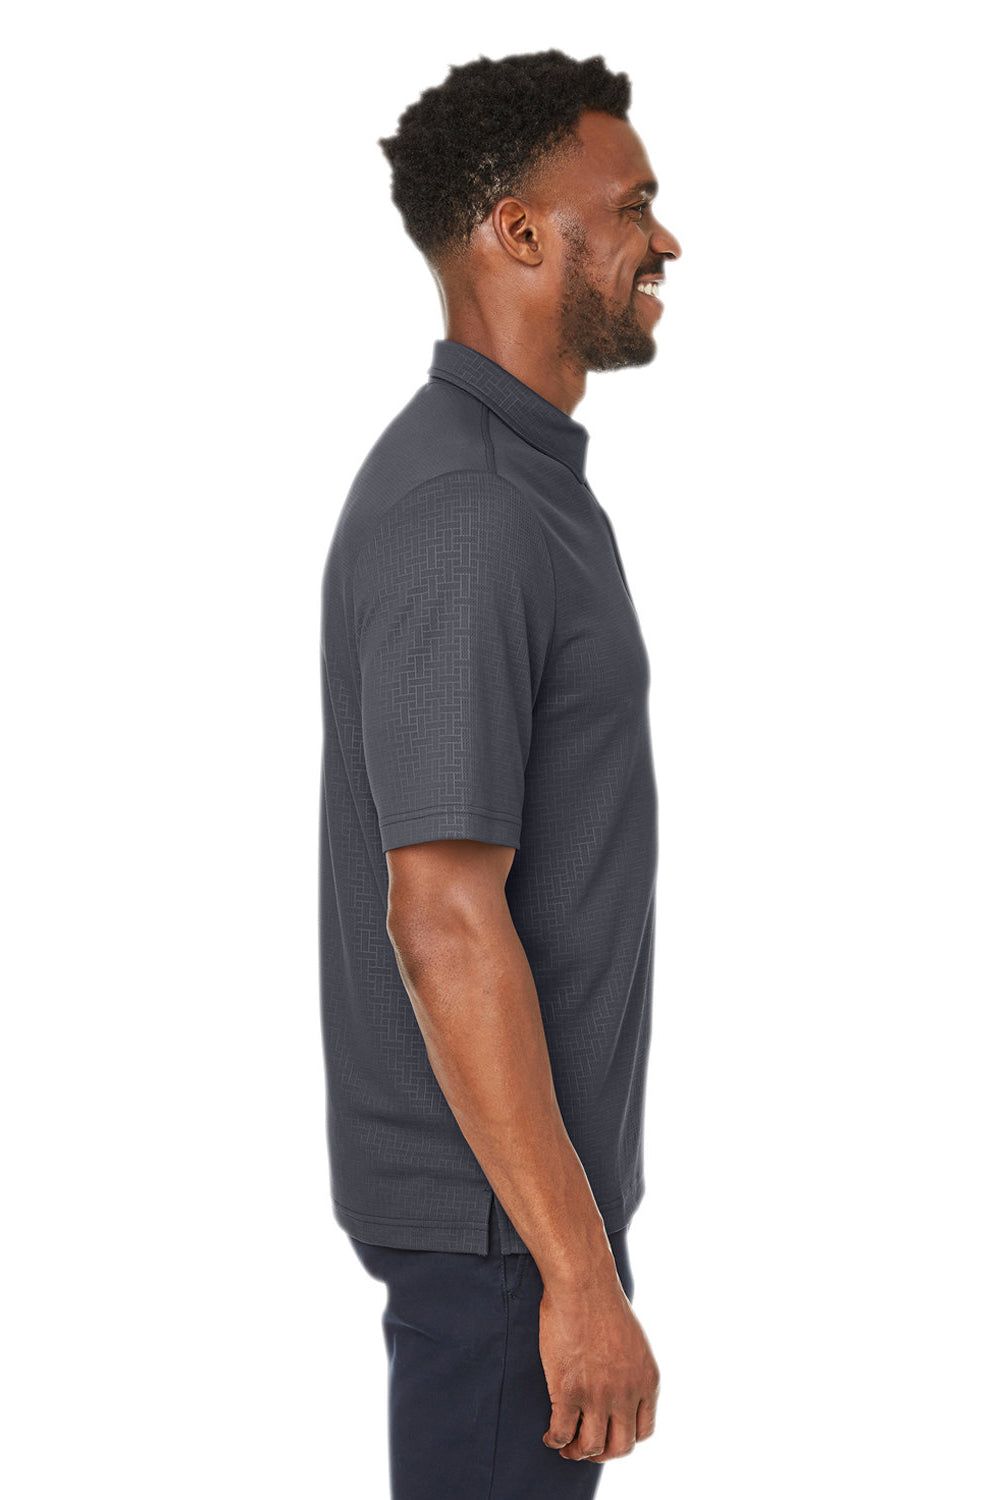 North End NE102 Mens Replay Recycled Short Sleeve Polo Shirt Carbon Grey Side